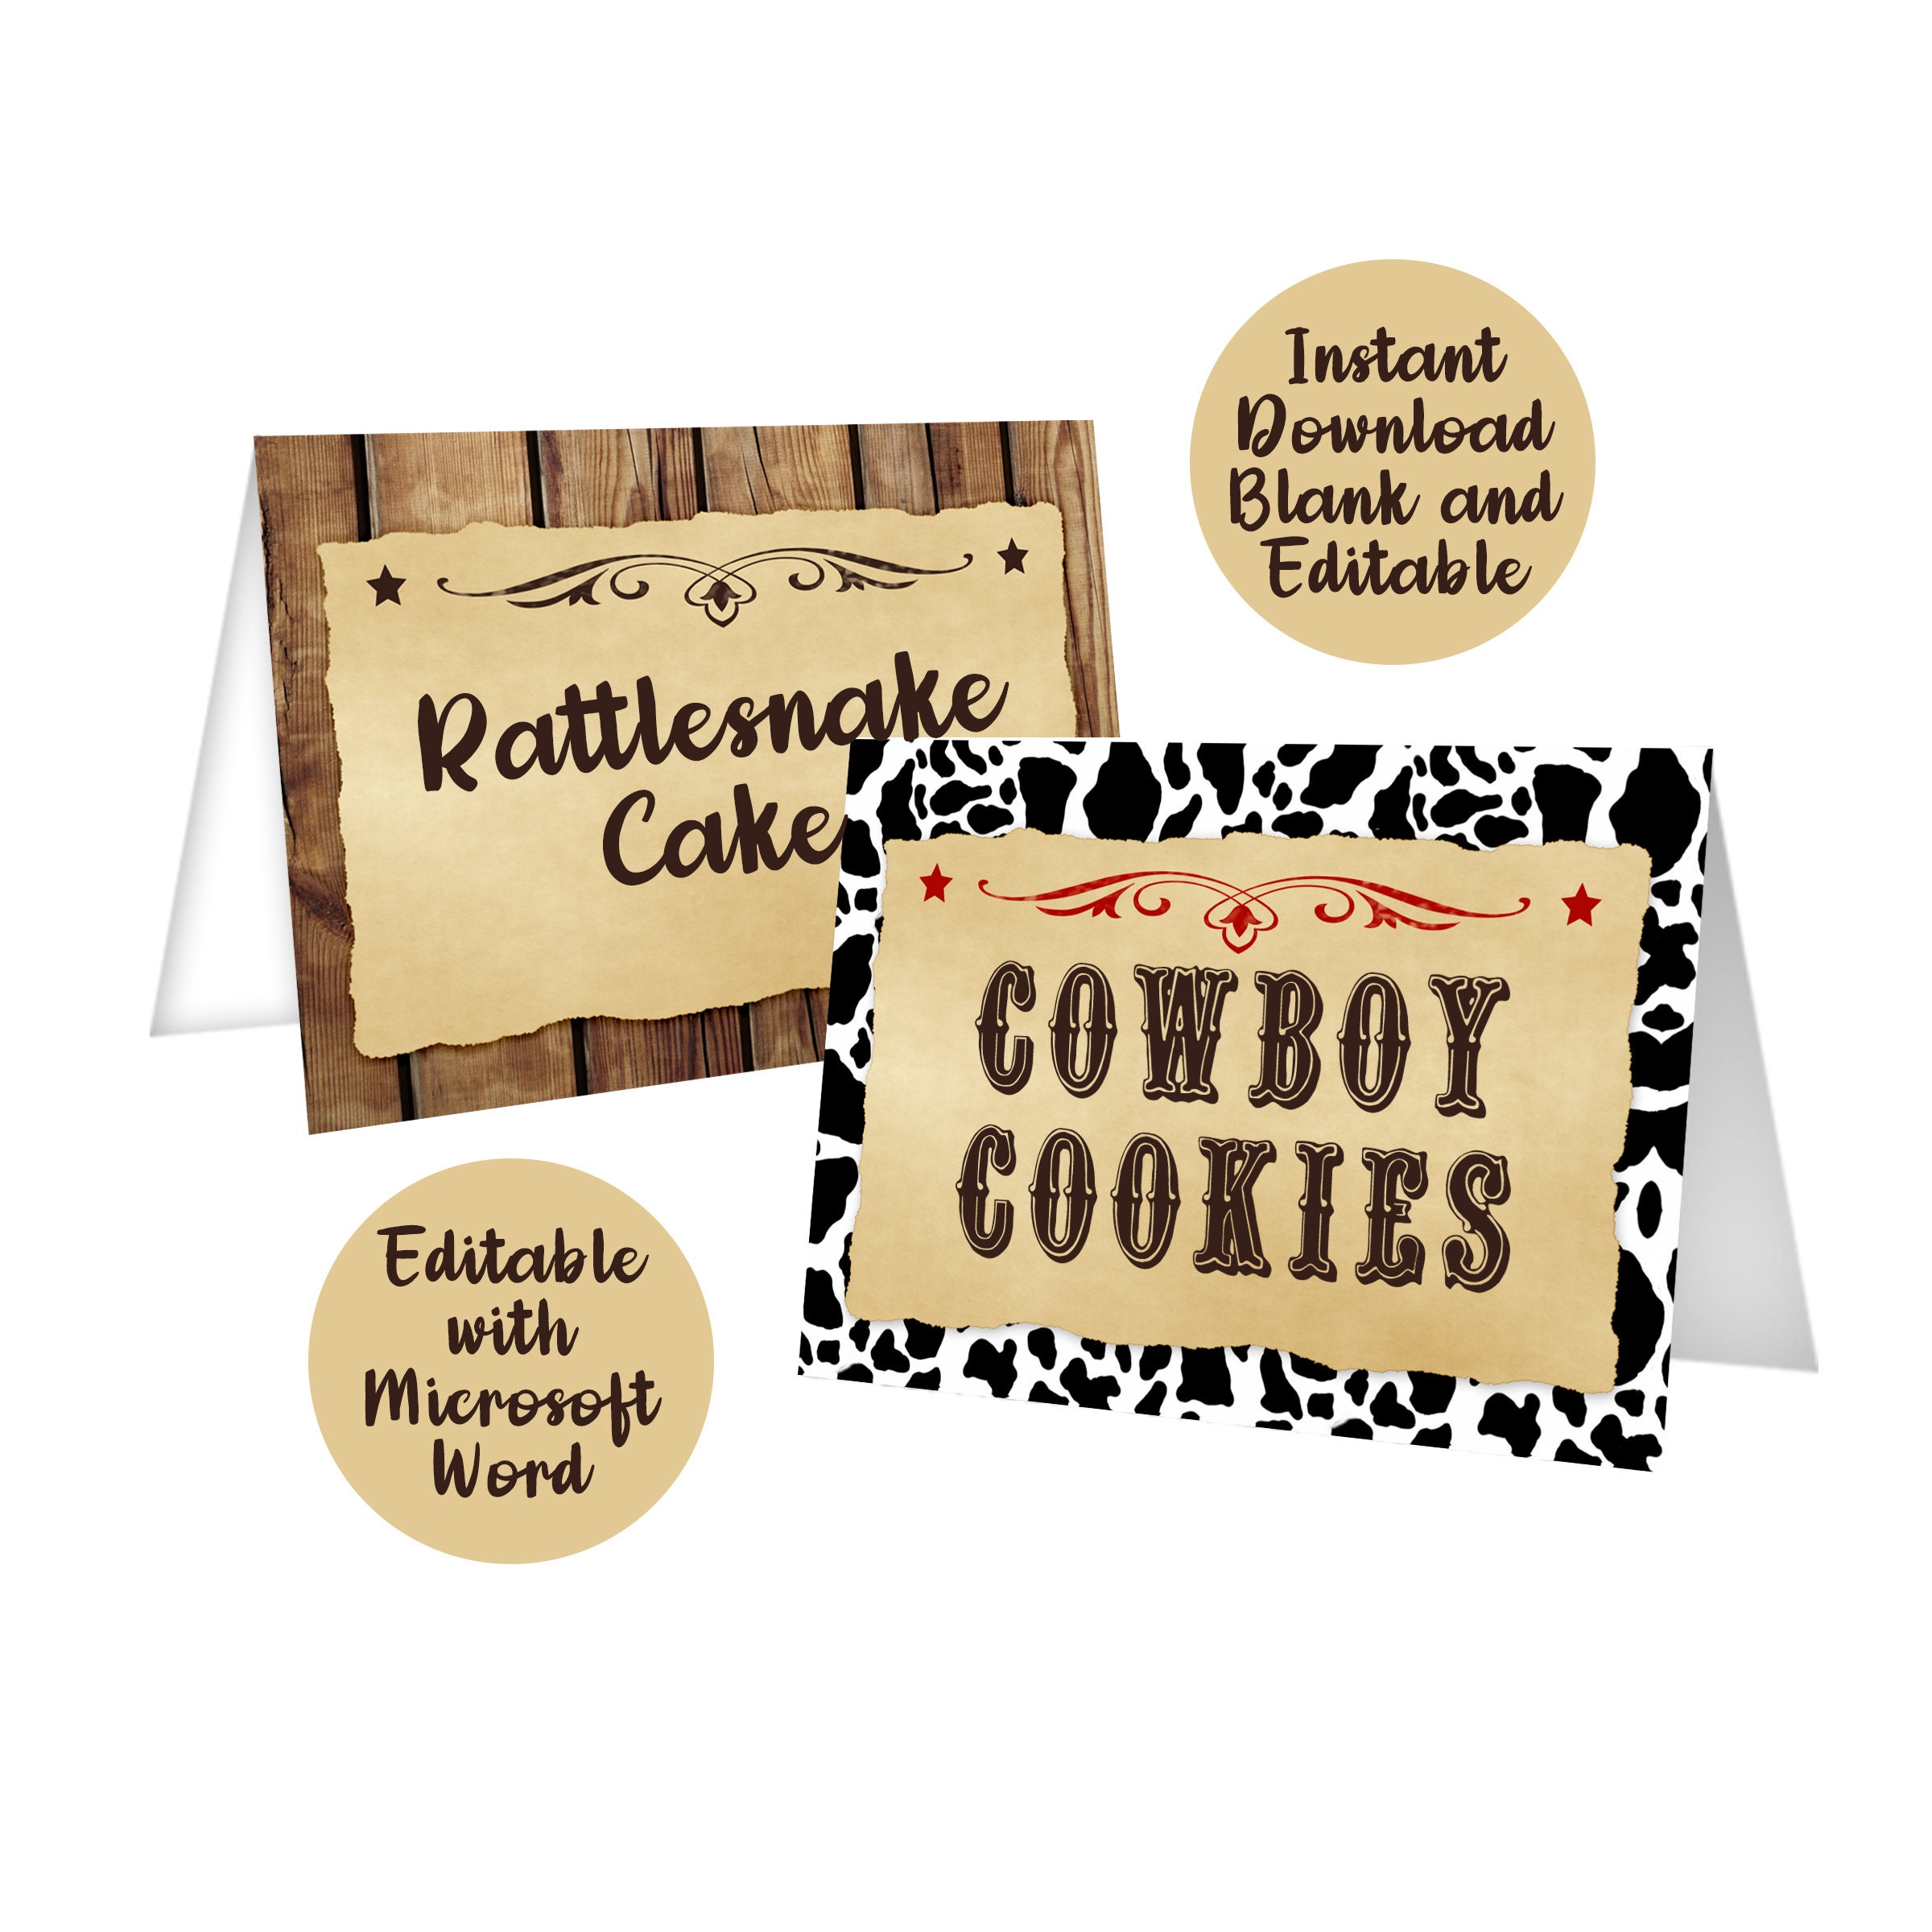 Note Cards 4x6 Flat Share Memory Cards Menu Card Western Theme